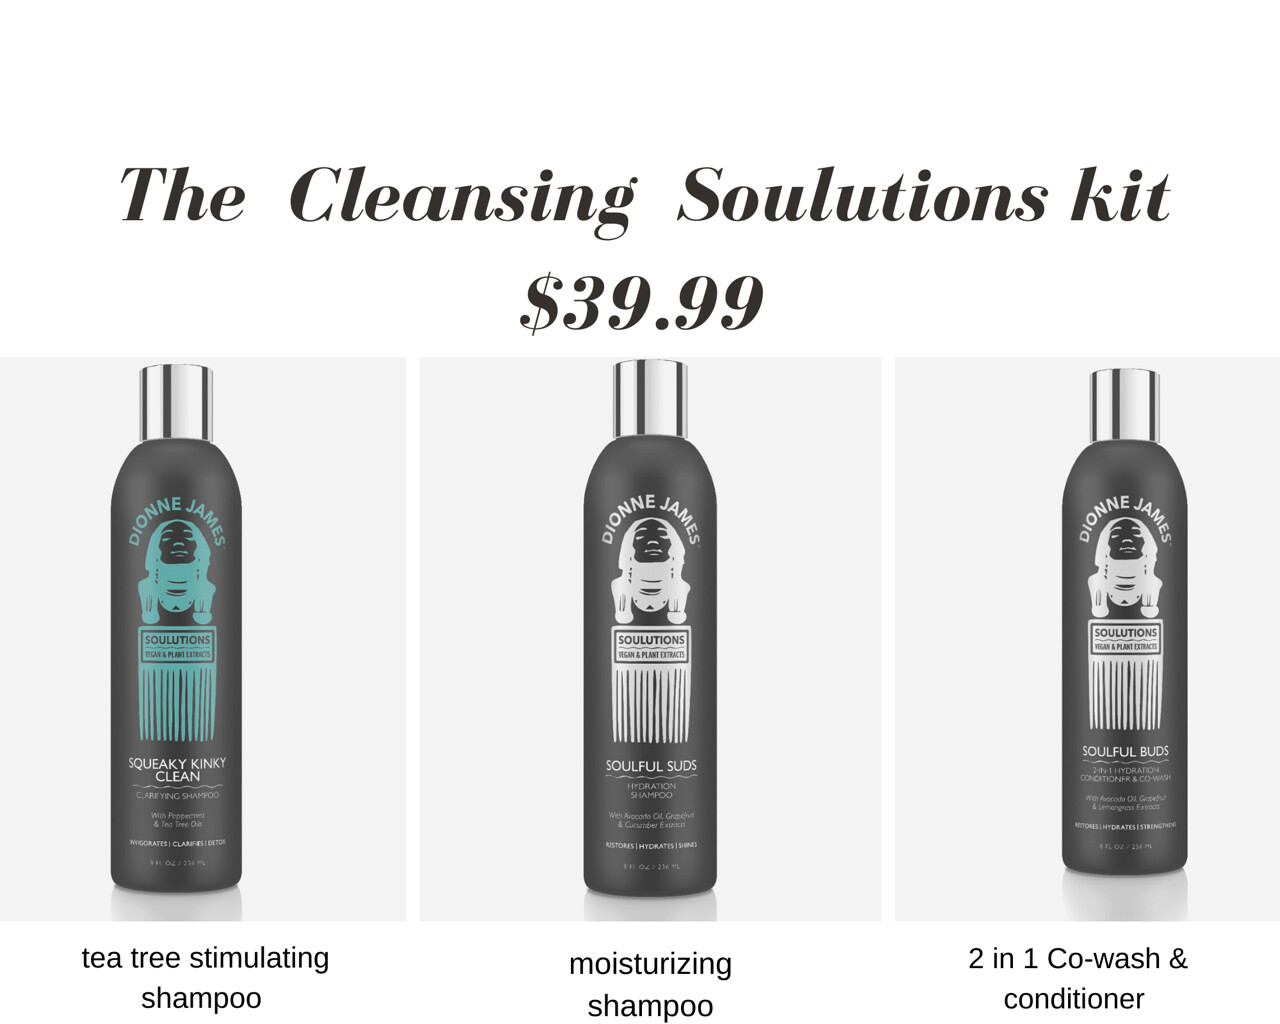 The Cleansing Soulution